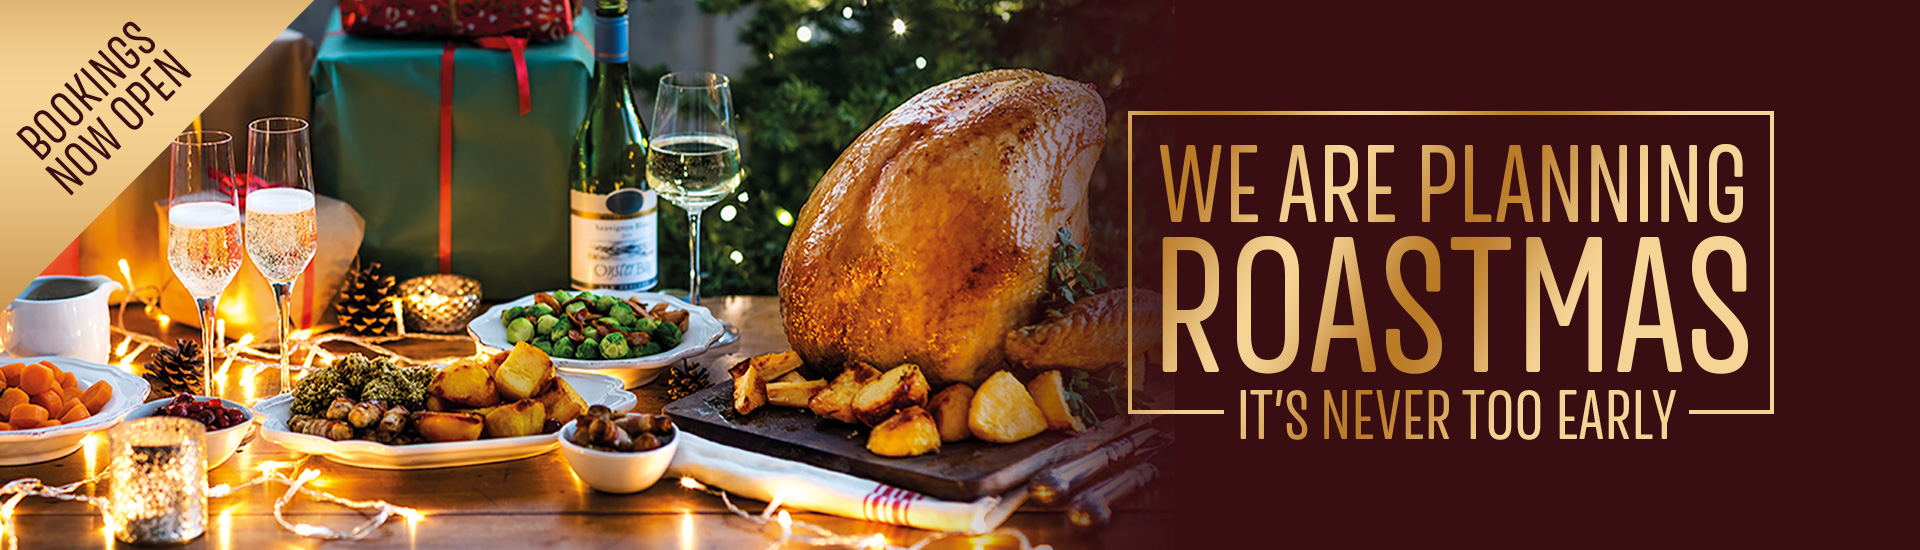 Christmas 2022 at your local Toby Carvery Newton Abbot | Home of the Roast